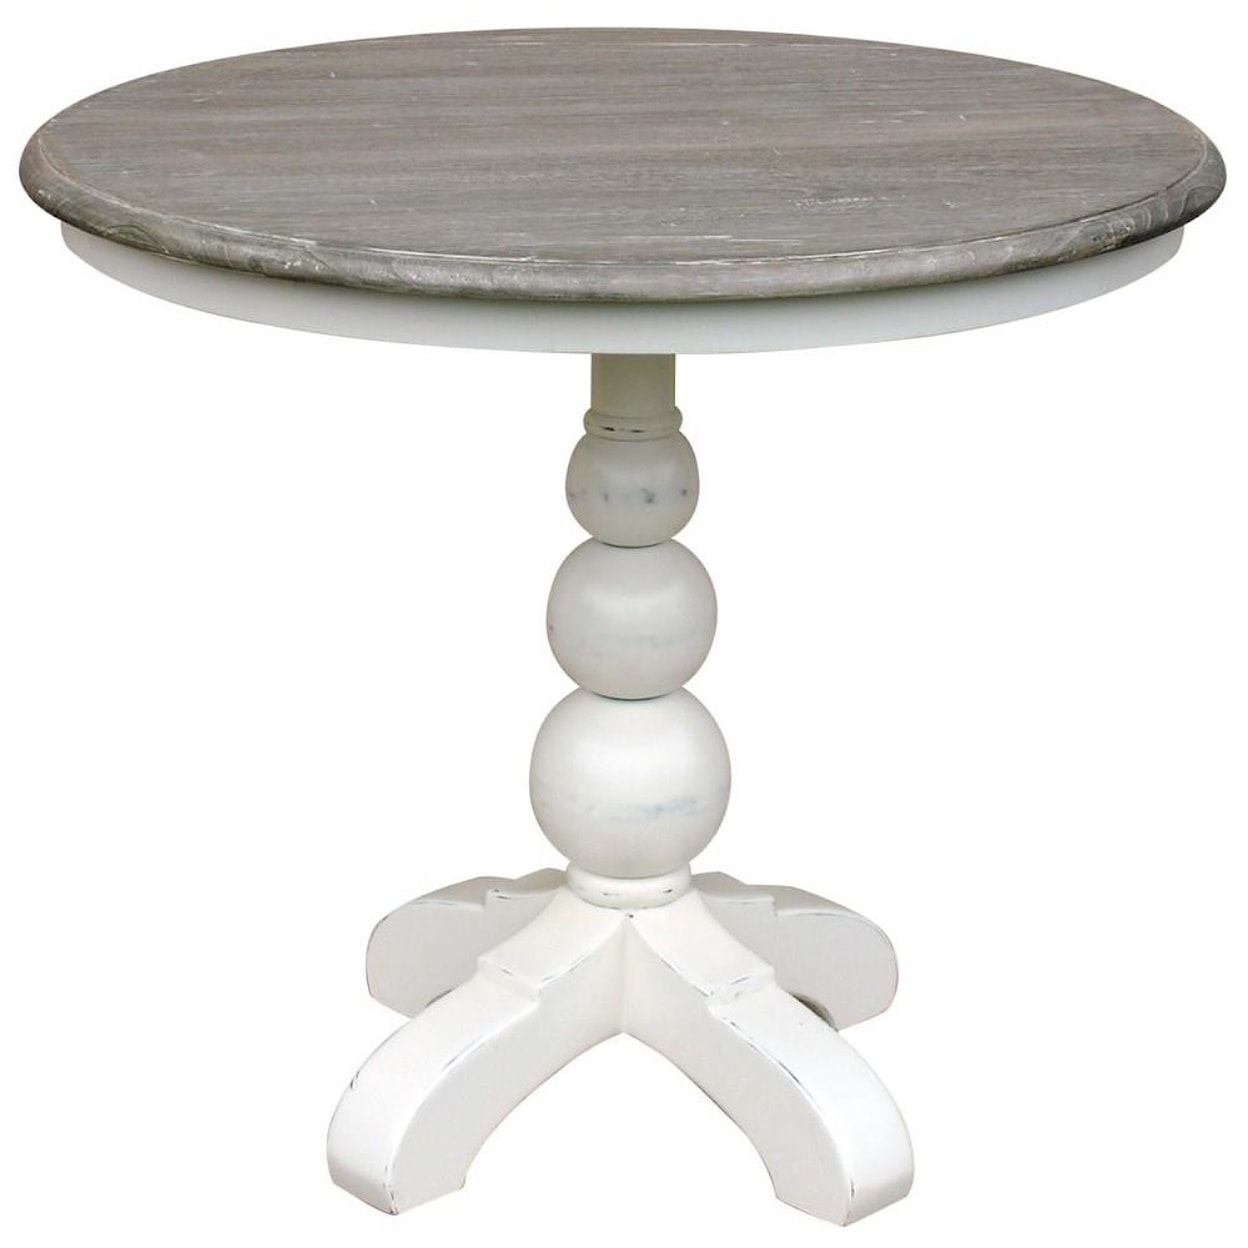 Trade Winds Furniture Occasional Table Groups Soho Cafe Table